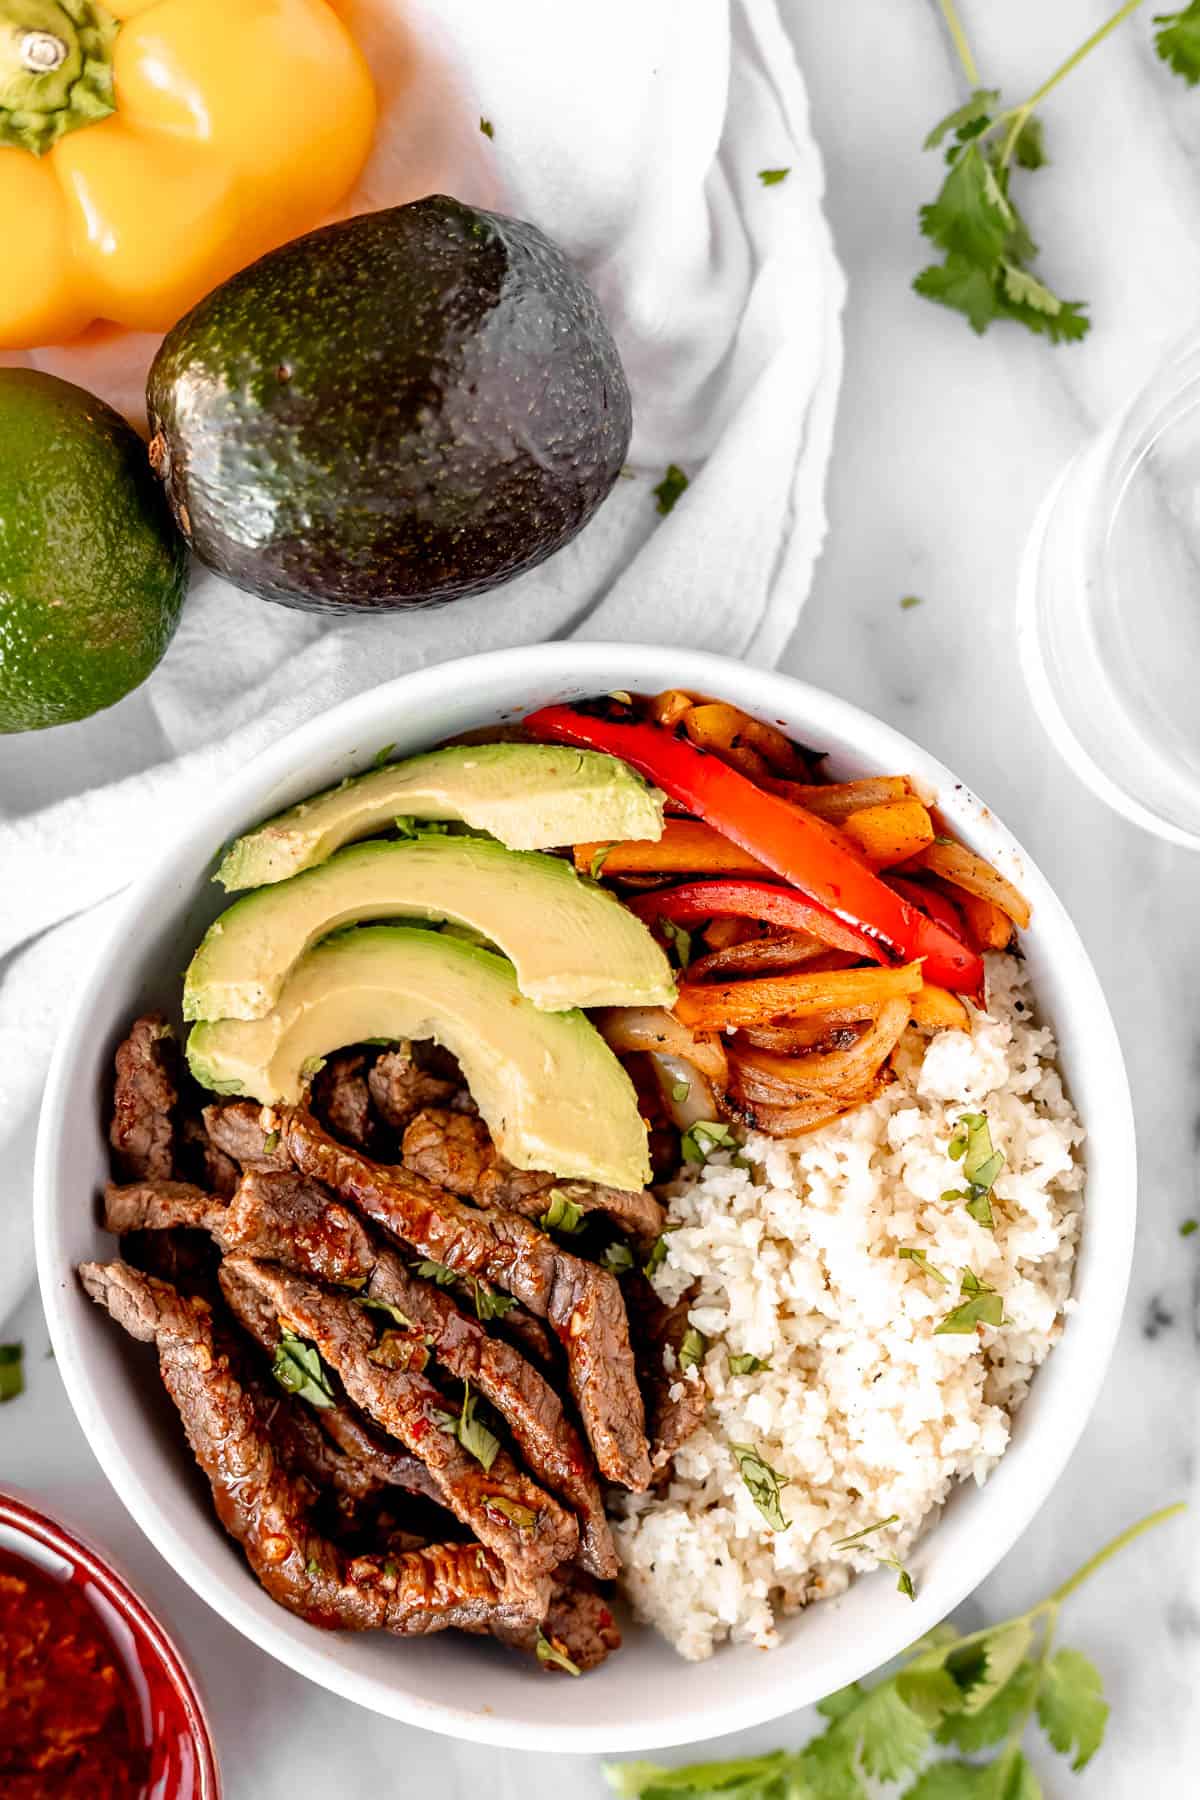 Overhead view of beef fajita bowls with beef strips, peppers, cauliflower rice and avocado with vegetables and cilantro in the background.